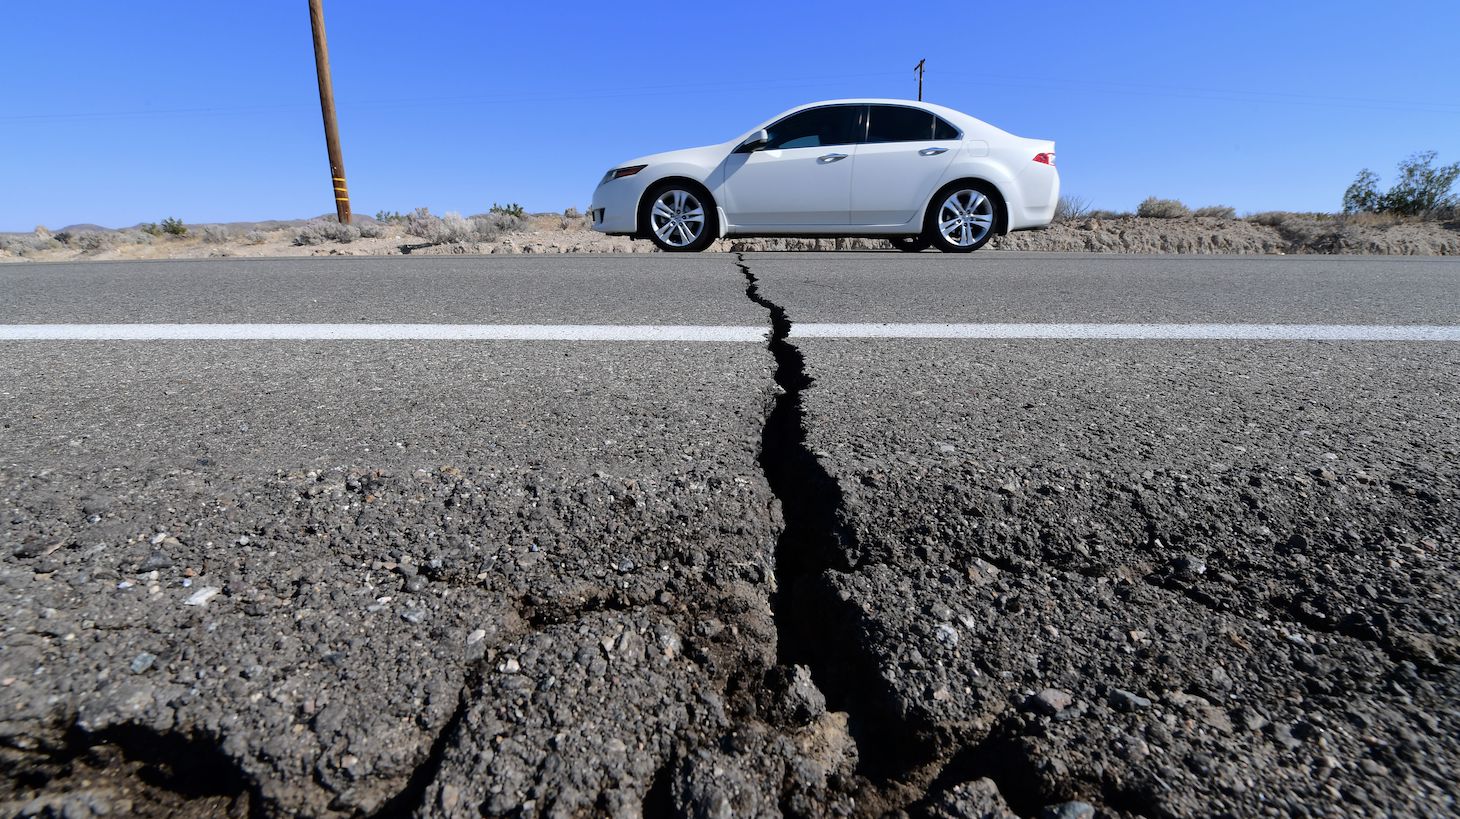 TOPSHOT - A car drives past a crack in the road on Highway 178, south of Trona, after a 6.4-magnitude earthquake hit in Ridgecrest, California, on July 4, 2019. - Southern California was rocked by a 6.4-magnitude earthquake Thursday morning, the US Geological Survey said, with authorities warning that the temblor, the largest in two decades, might not be the day's last. (Photo by FREDERIC J. BROWN / AFP) (Photo by FREDERIC J. BROWN/AFP via Getty Images)